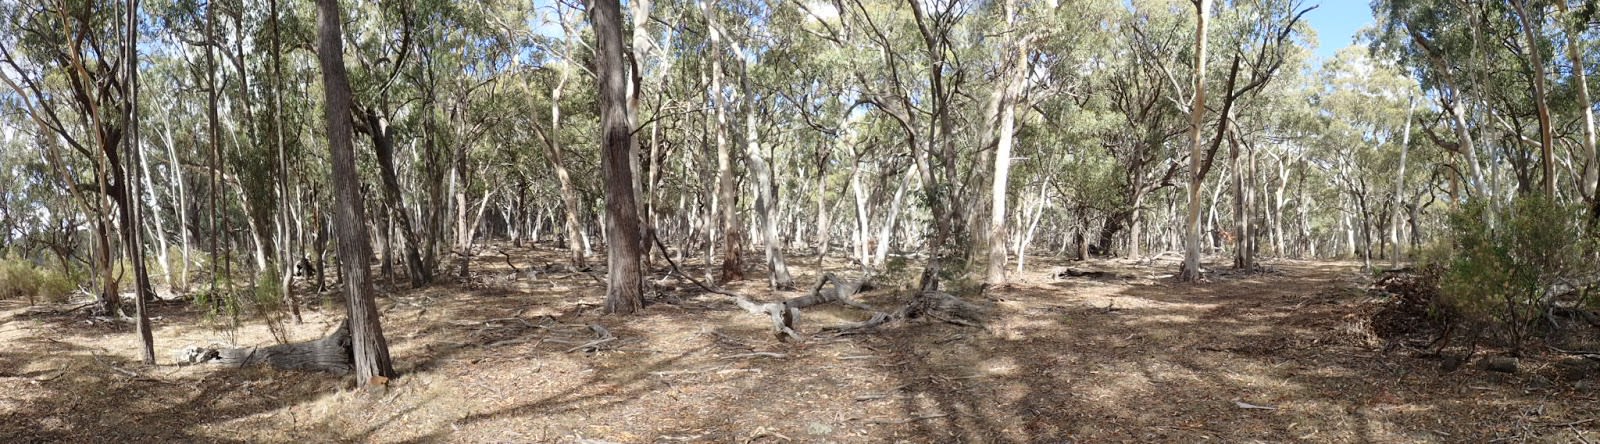 Panorama of the eucalypt forest near the Pinnacle, Coolah Tops National Park